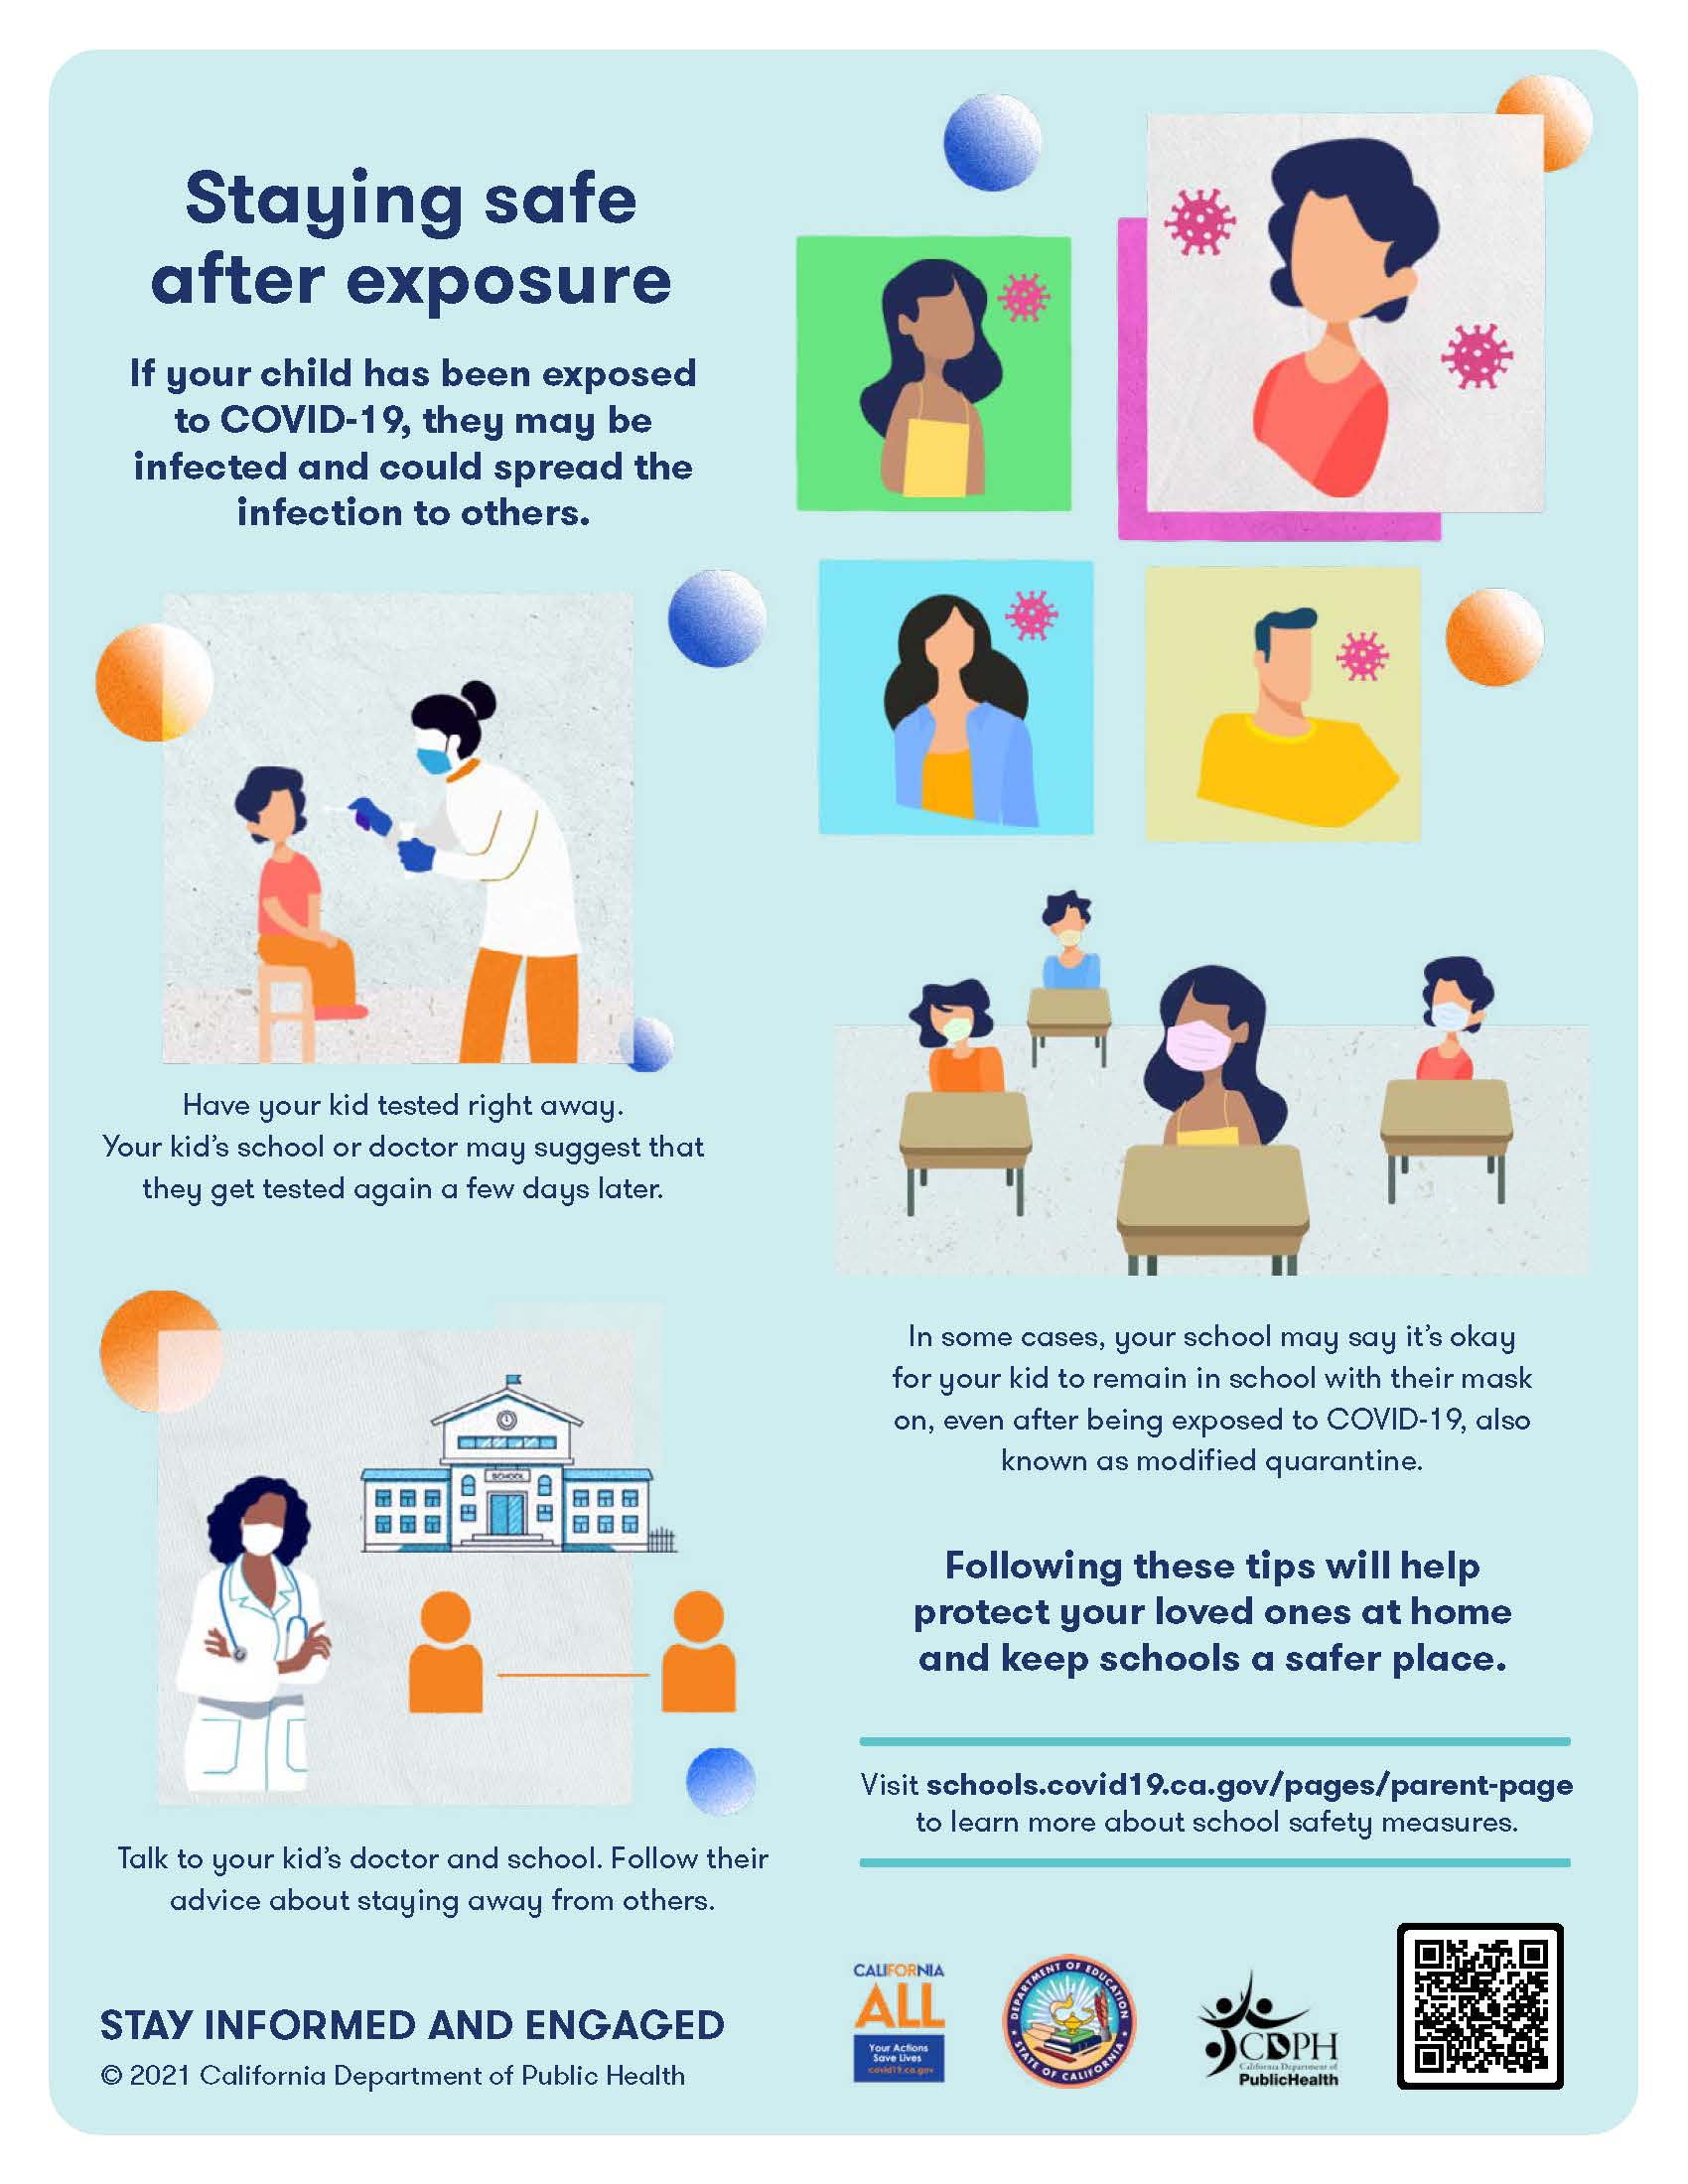 Staying safe after exposure